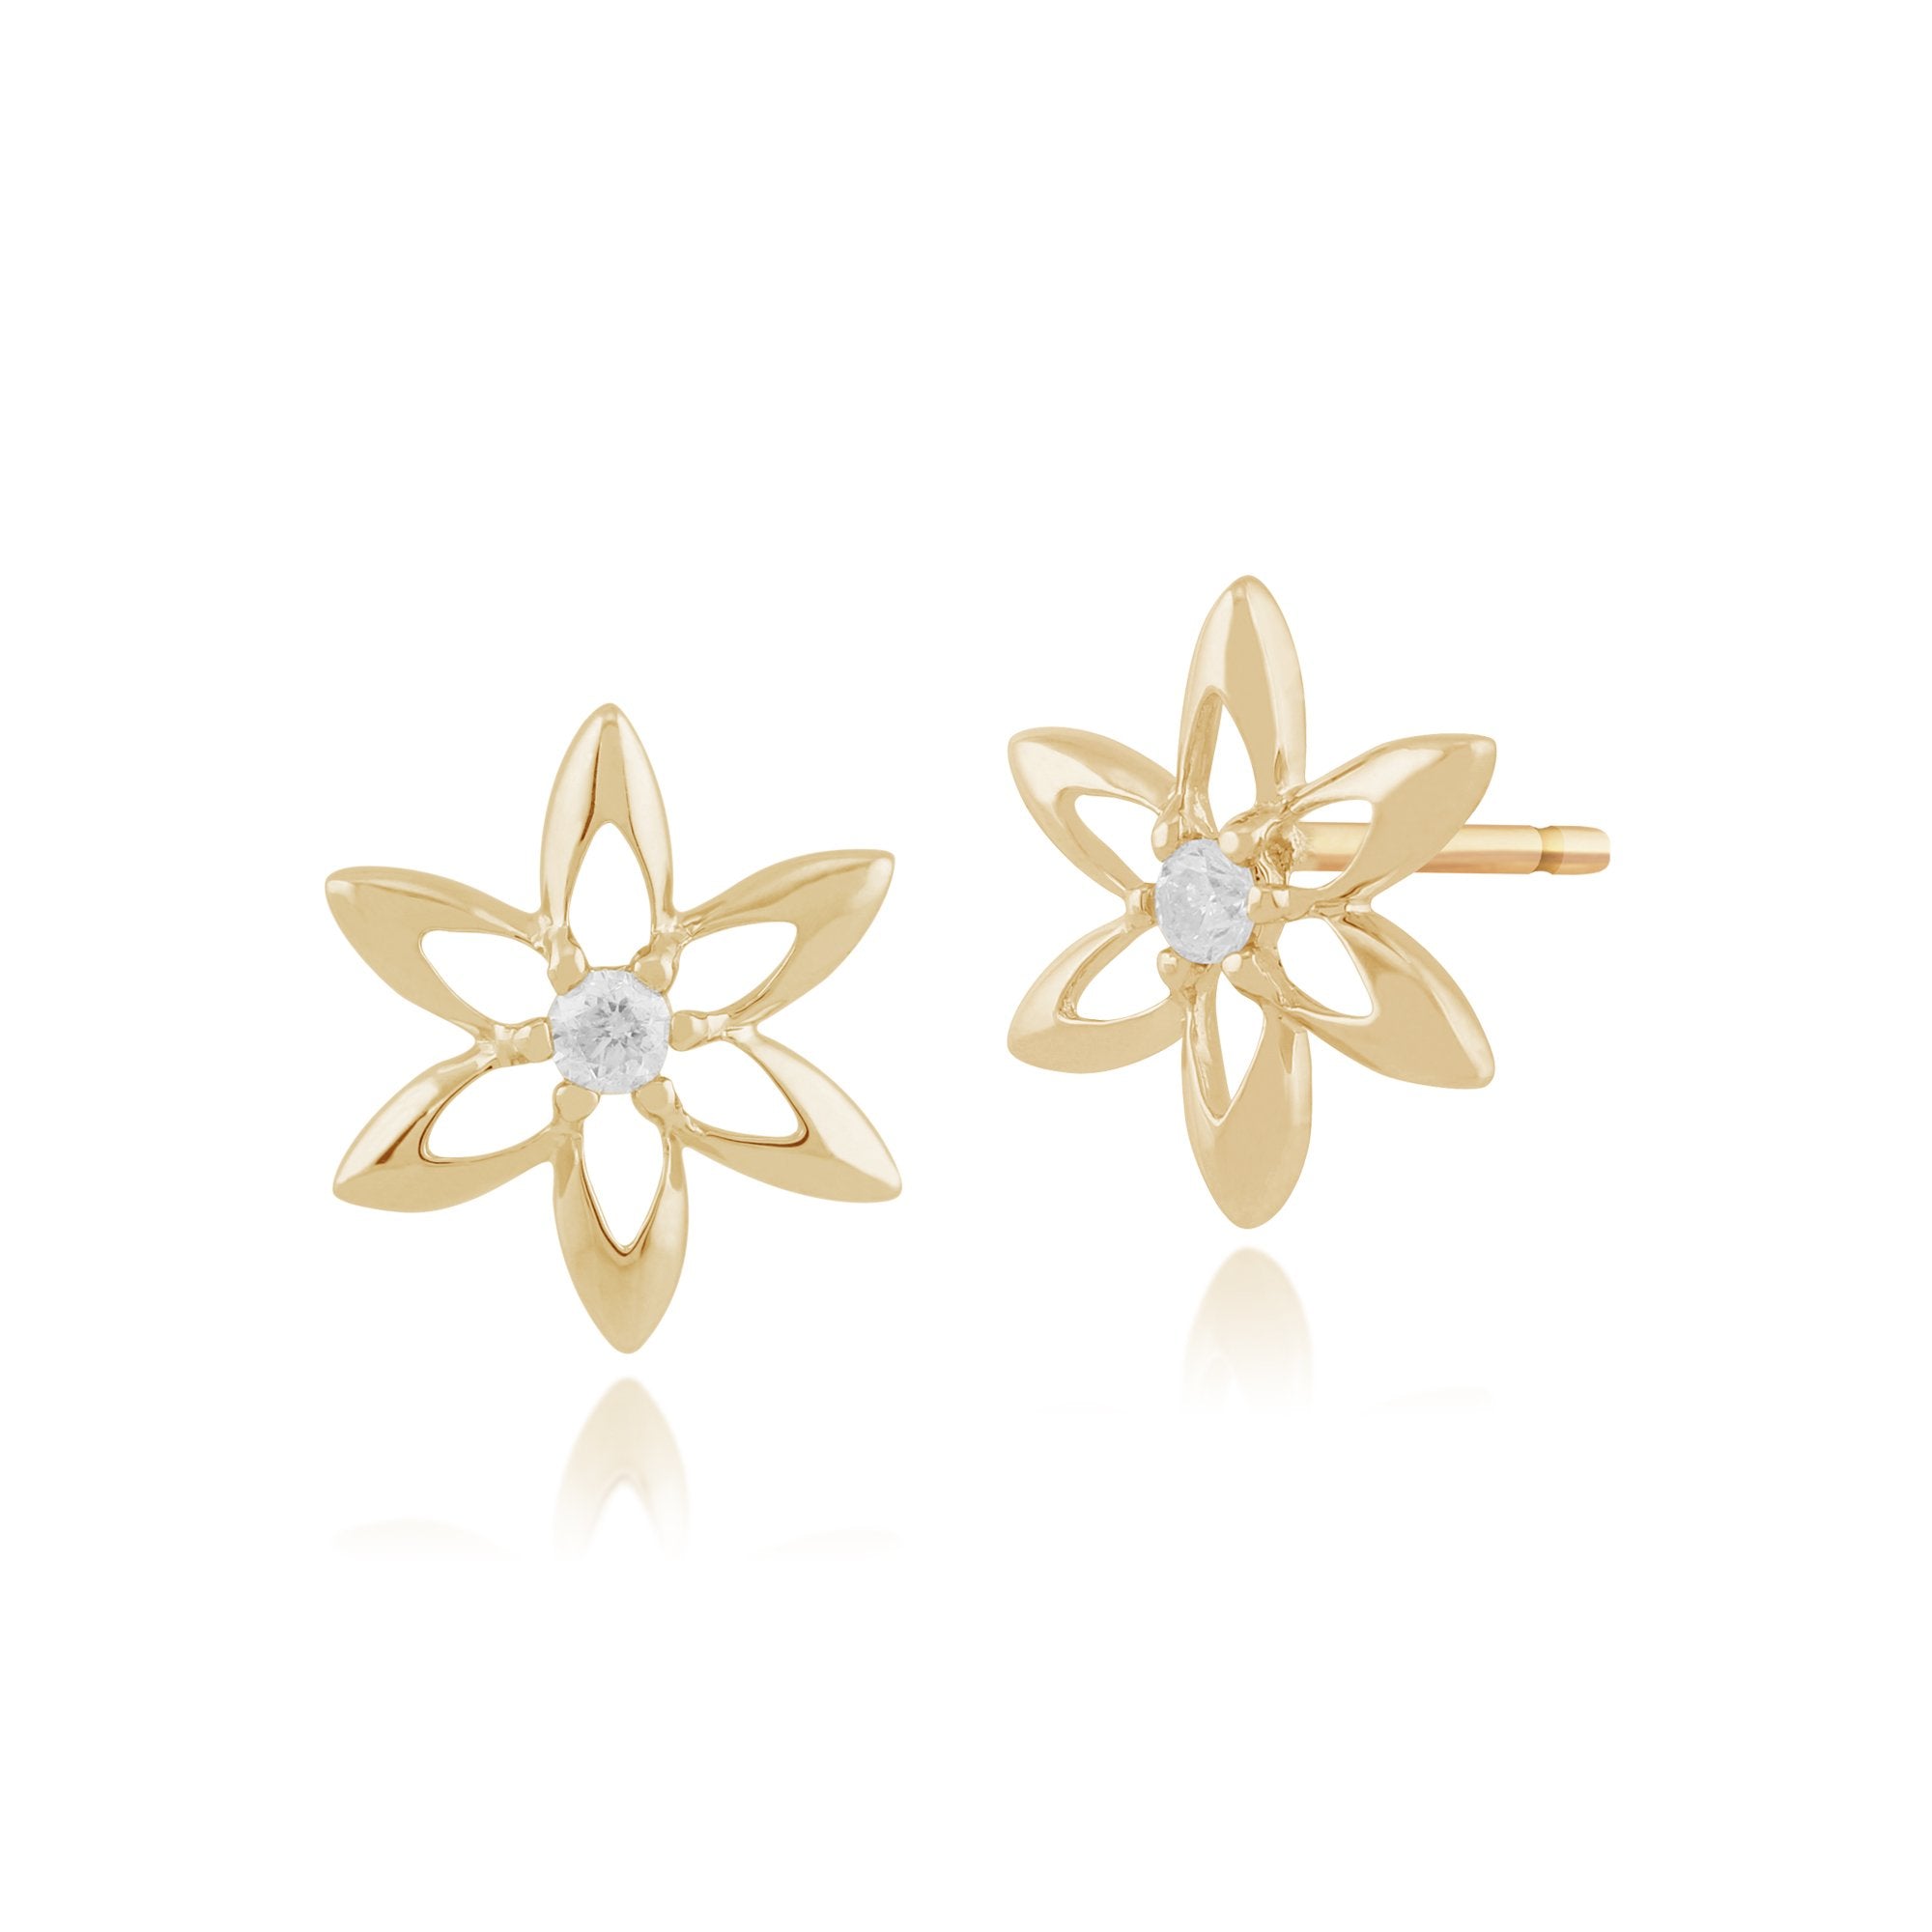 Floral Round Diamond Flower Frame Stud Earrings in 9ct Yellow Gold